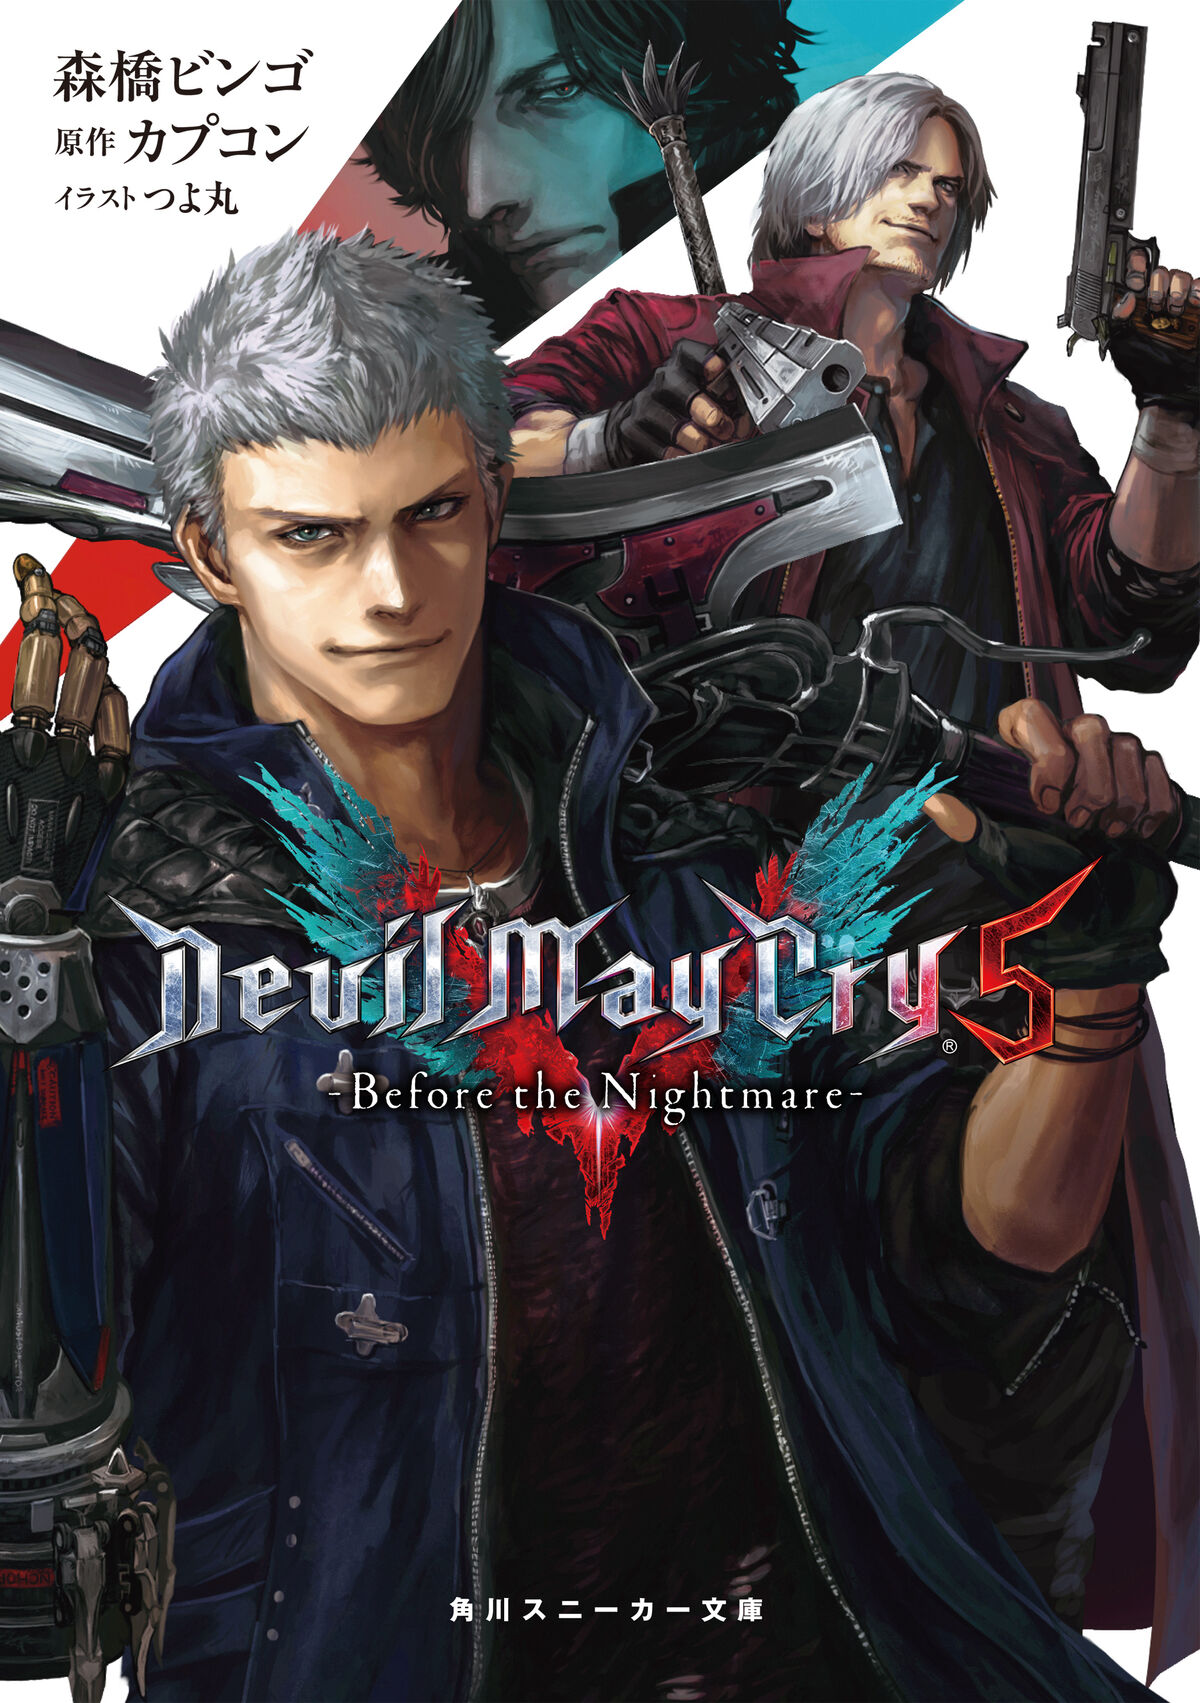 Category:Devil May Cry 5 characters, Devil May Cry Wiki